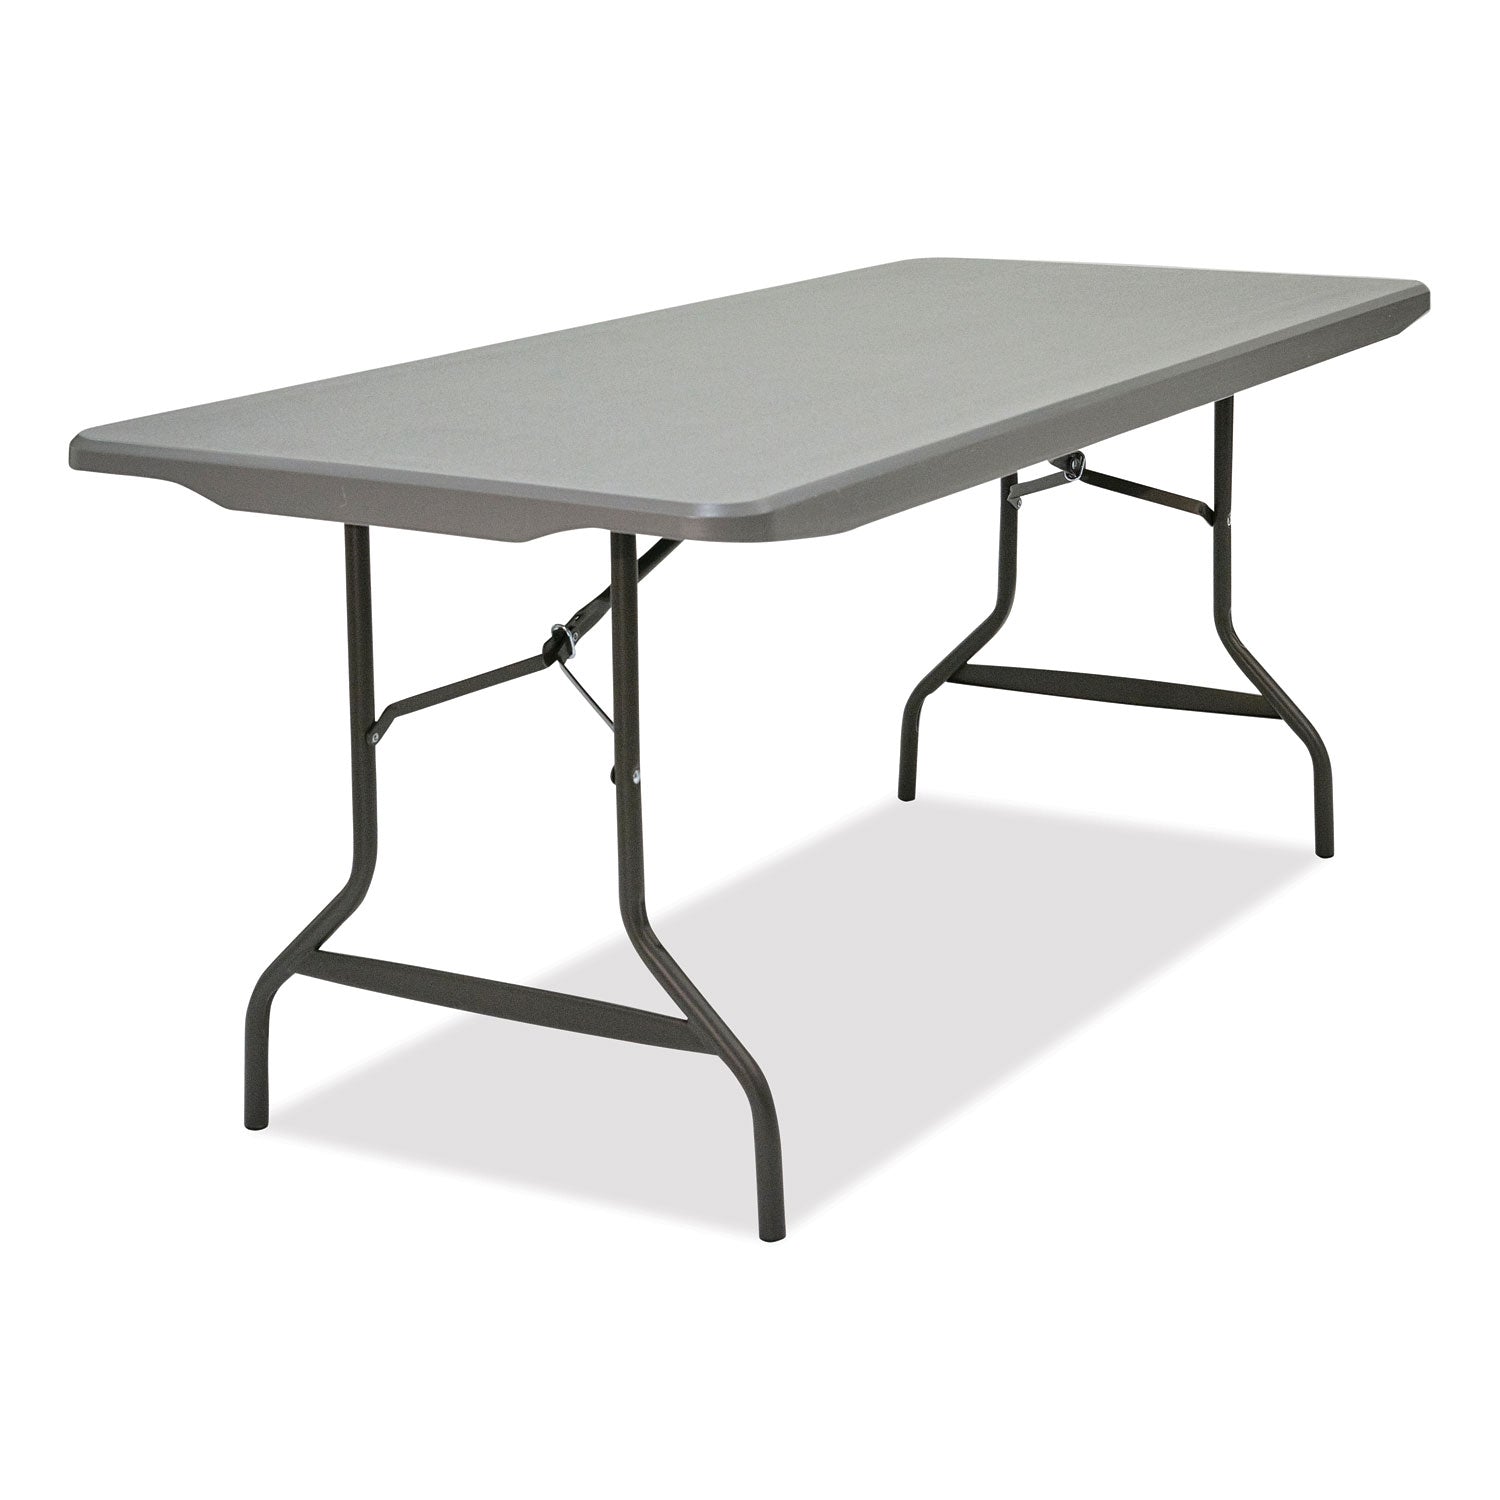 indestructable-commercial-folding-table-rectangular-72-x-30-x-29-charcoal-top-charcoal-base-legs_ice65527 - 1